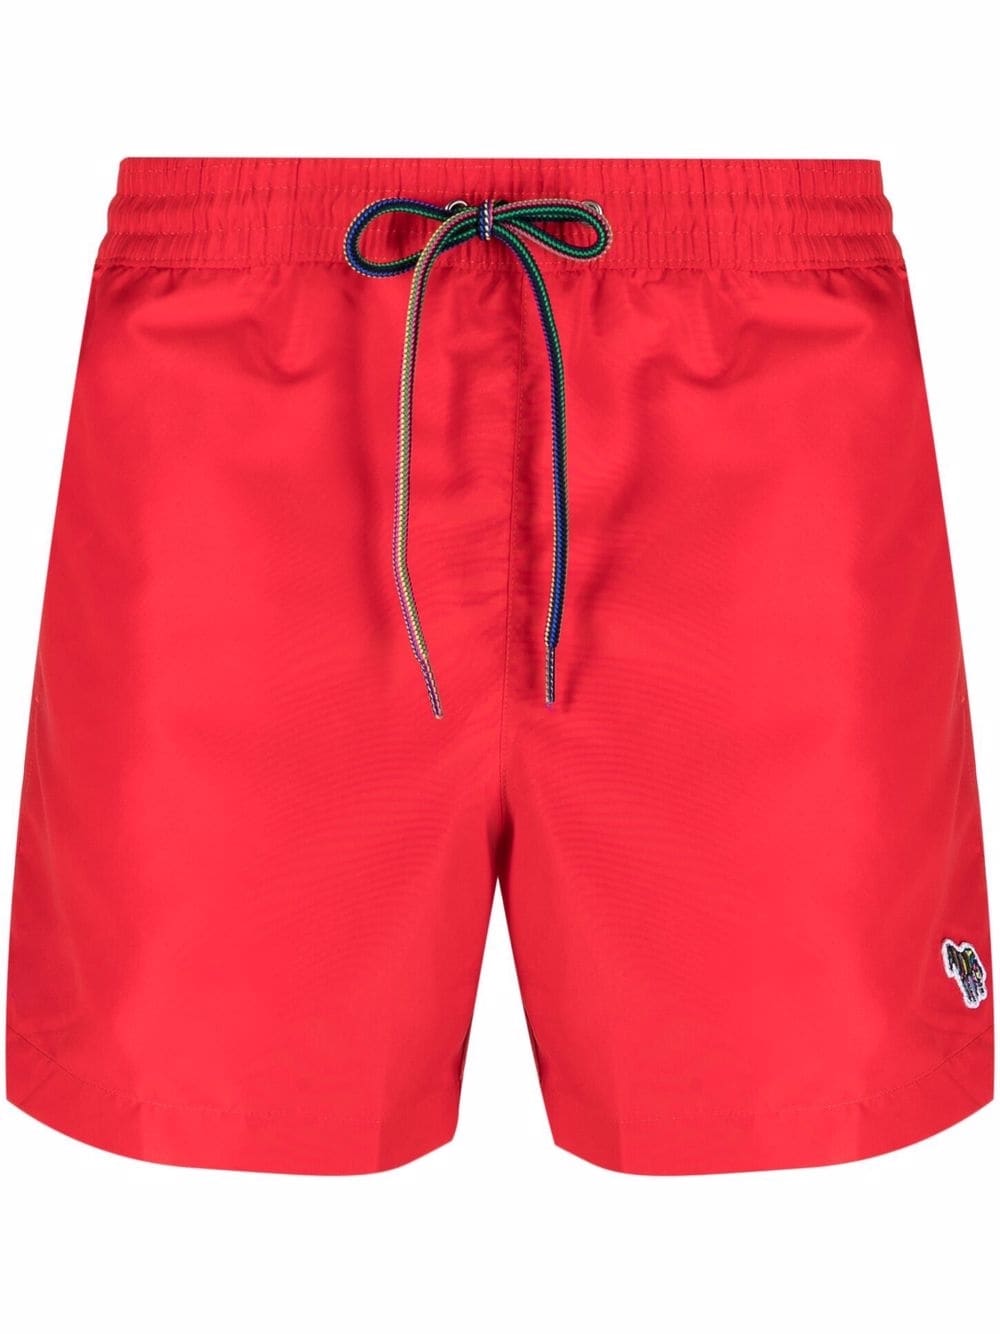 Paul Smith Sea clothing Red